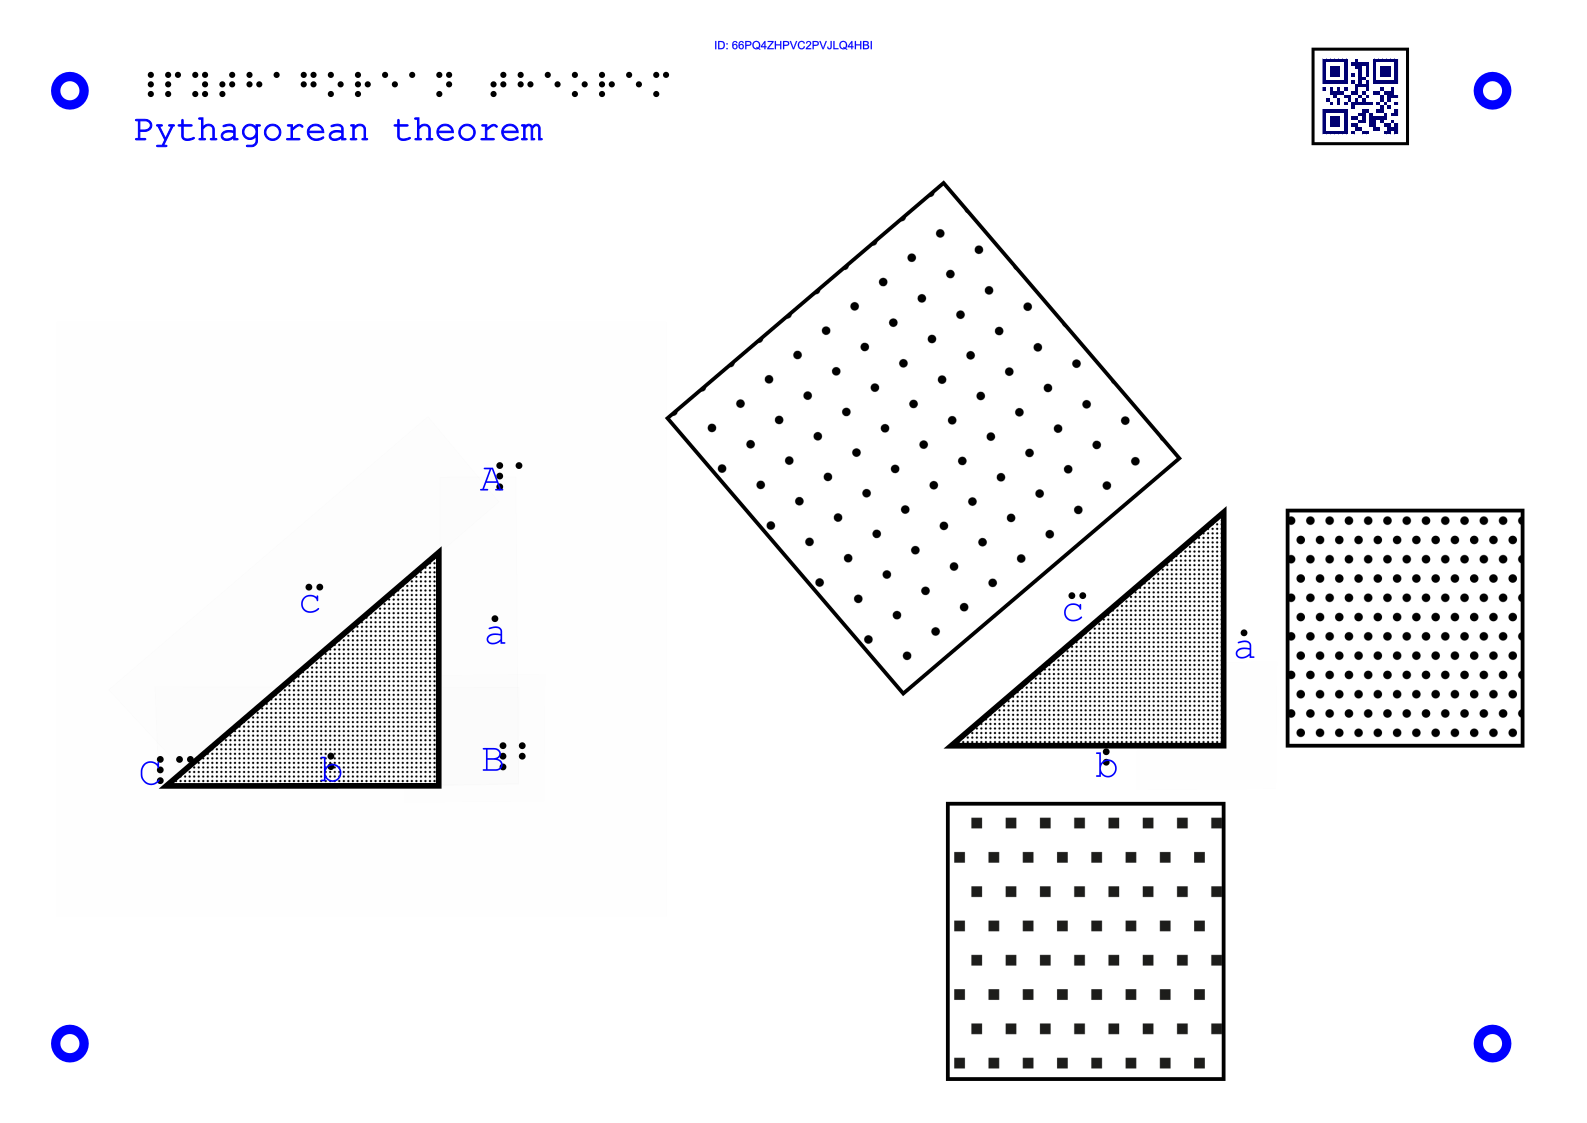 11Tactile graphic explaining the Pythagorean theorem.